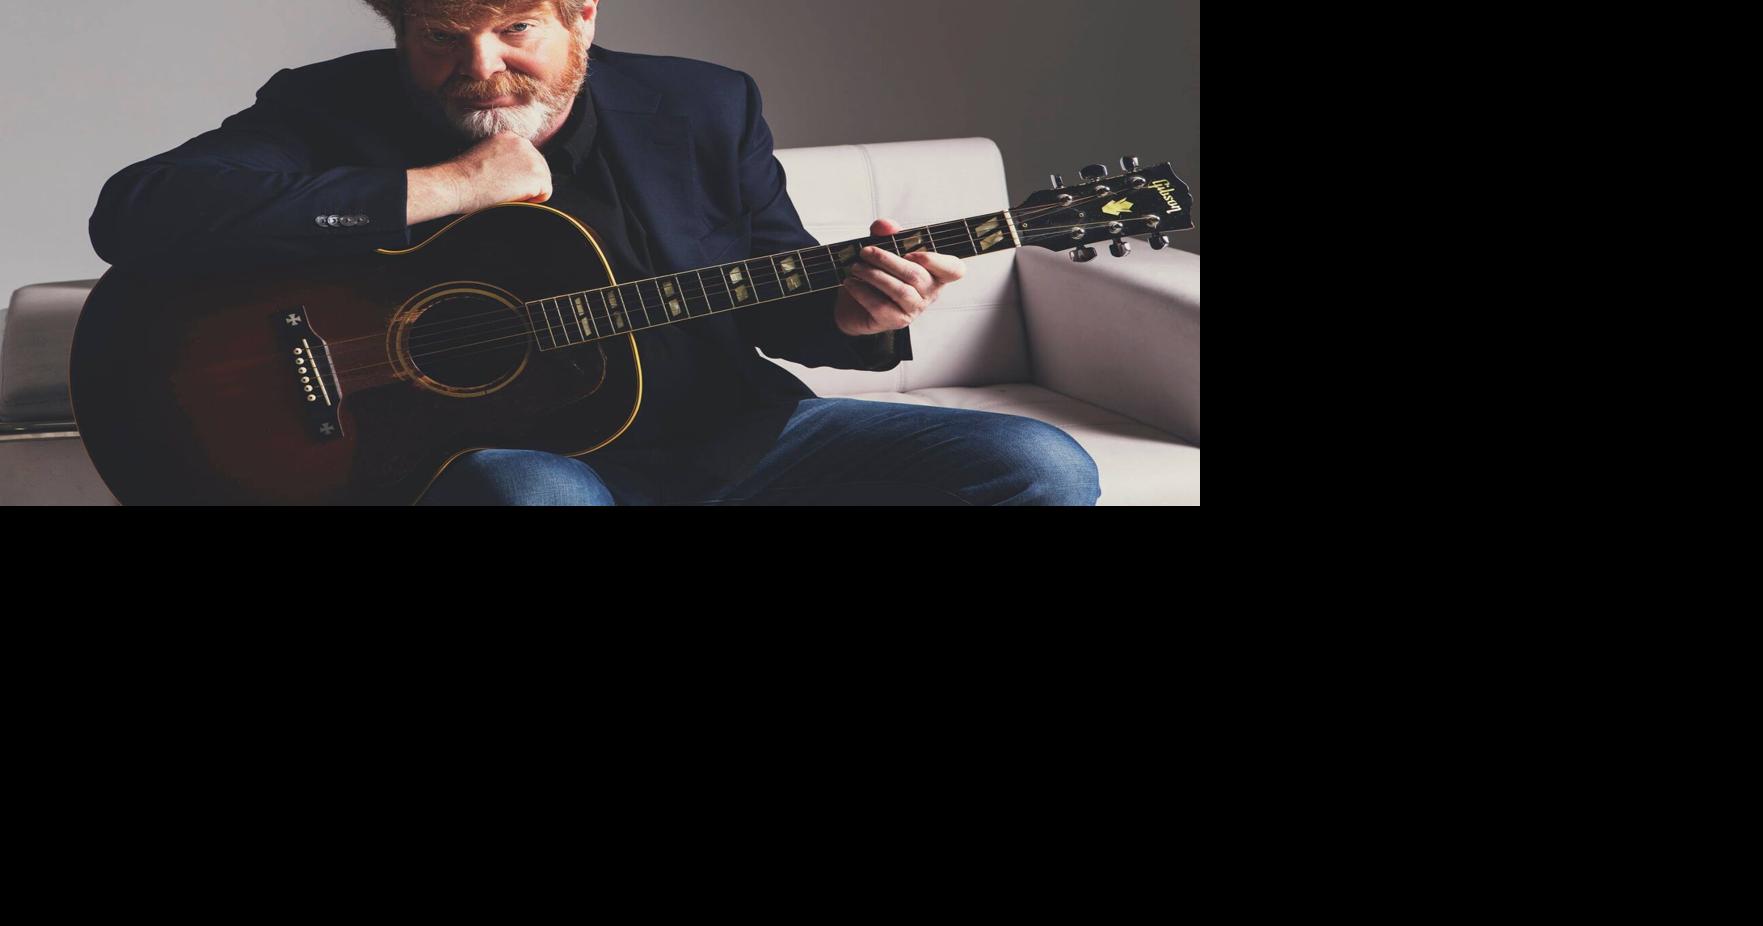 Mac McAnally to perform at Capitol